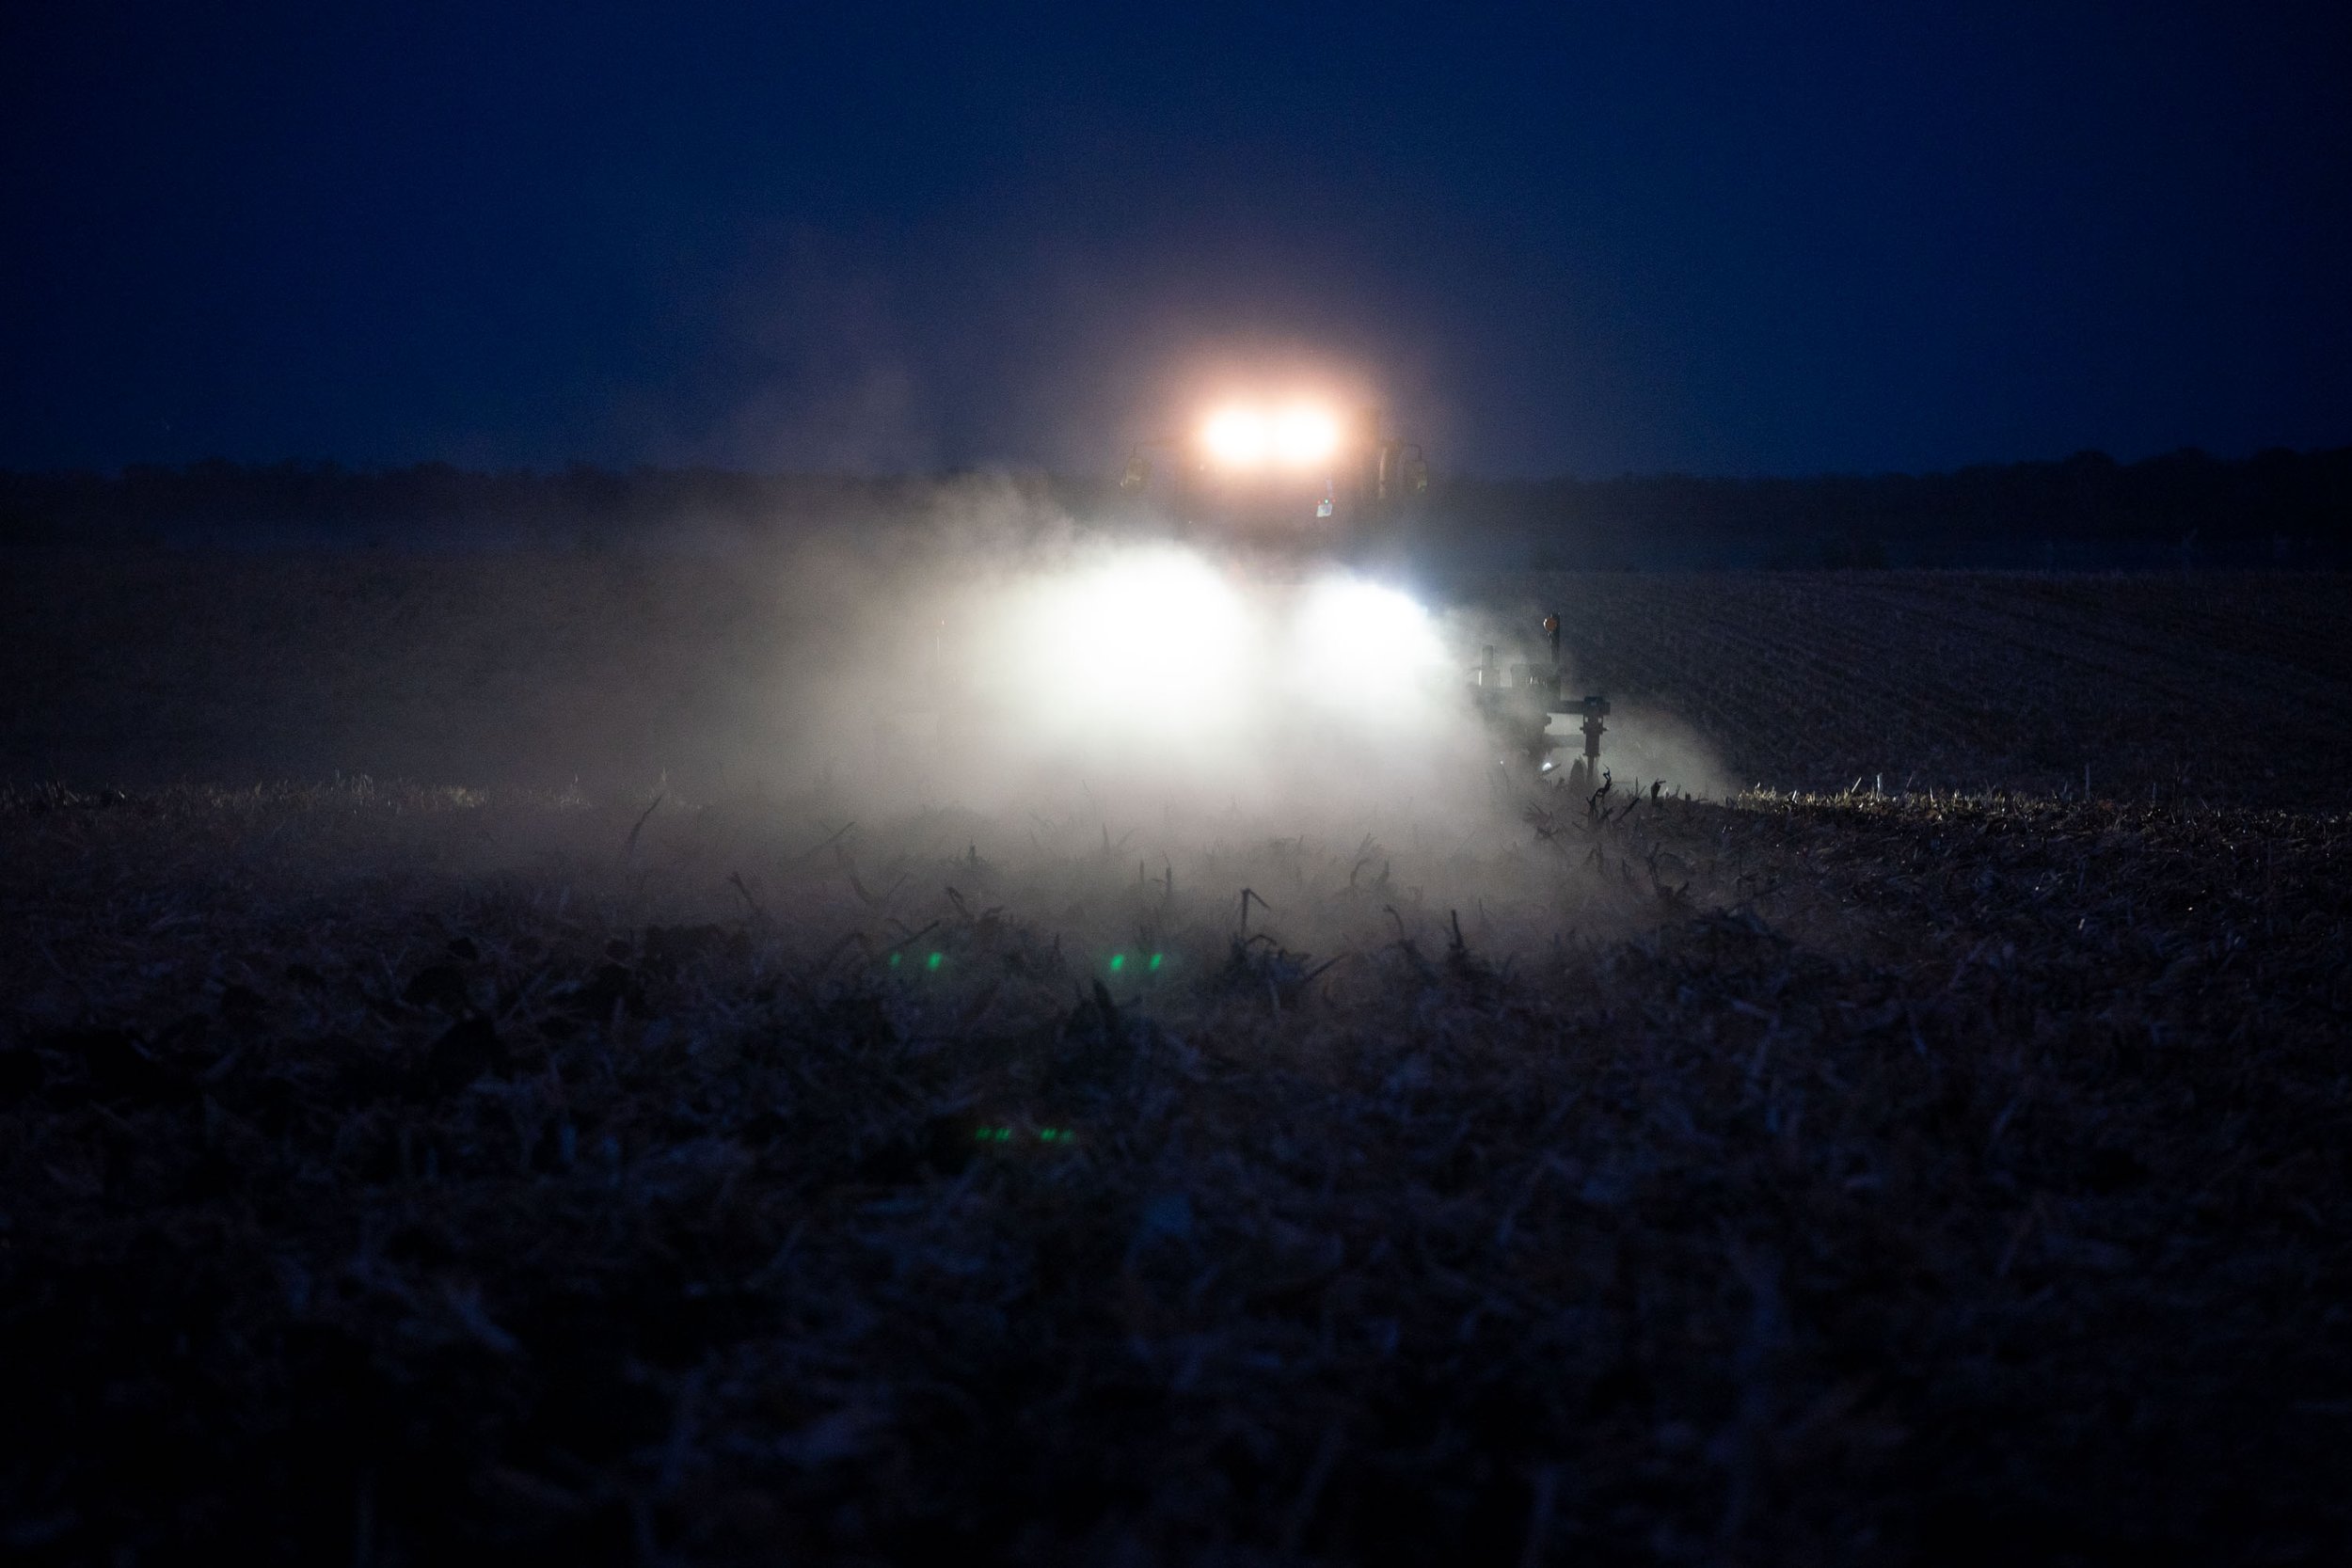  David Larson, 16, drives a combine in the evening after school at his family farm Oct. 19, 2022 in Elbow Lake, Minn. Larson is a part of his school’s Future Farmers of America (FFA), a youth organization that prepares students careers in agriculture